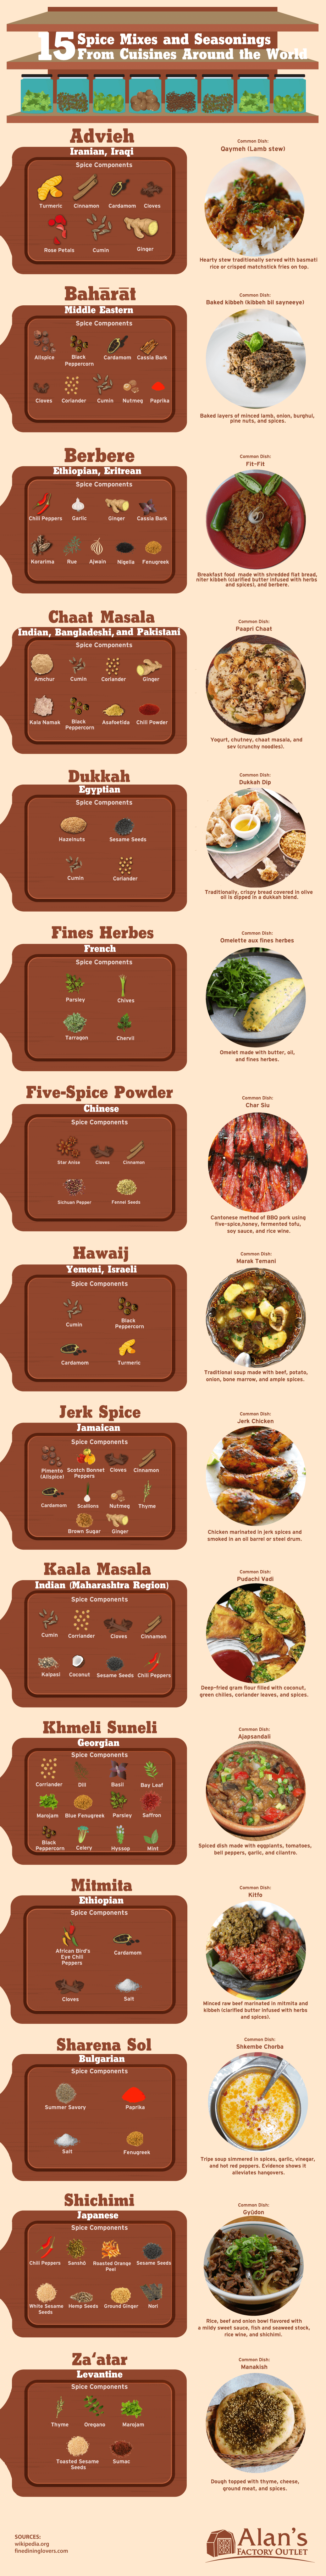 15 Spice Mixes and Seasonings from Around the World